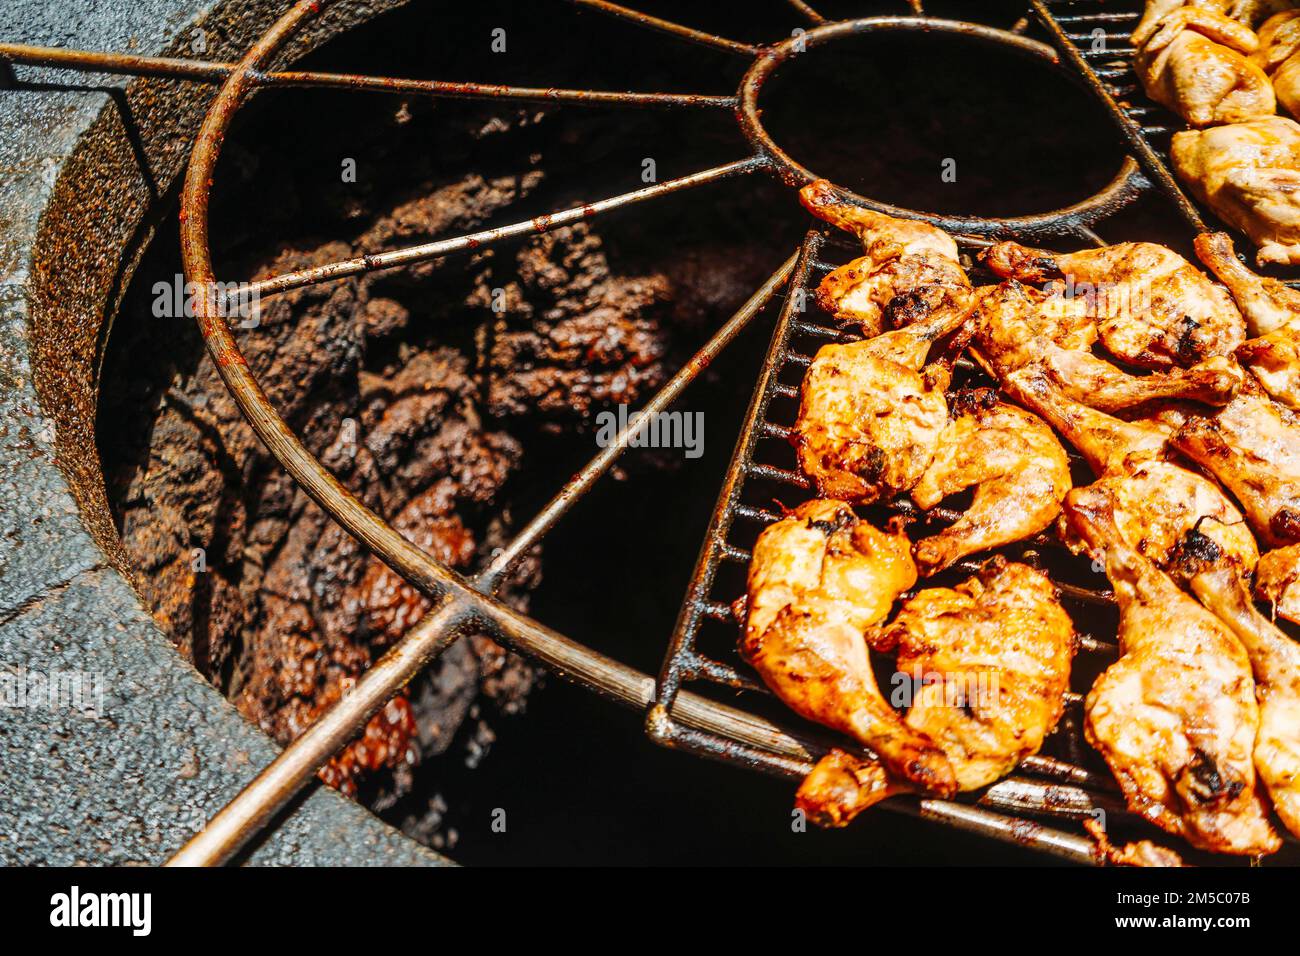 Tasty meat barbecued on volcanic heat, Timanfaya National Park, Canary Islands, Spain Stock Photo